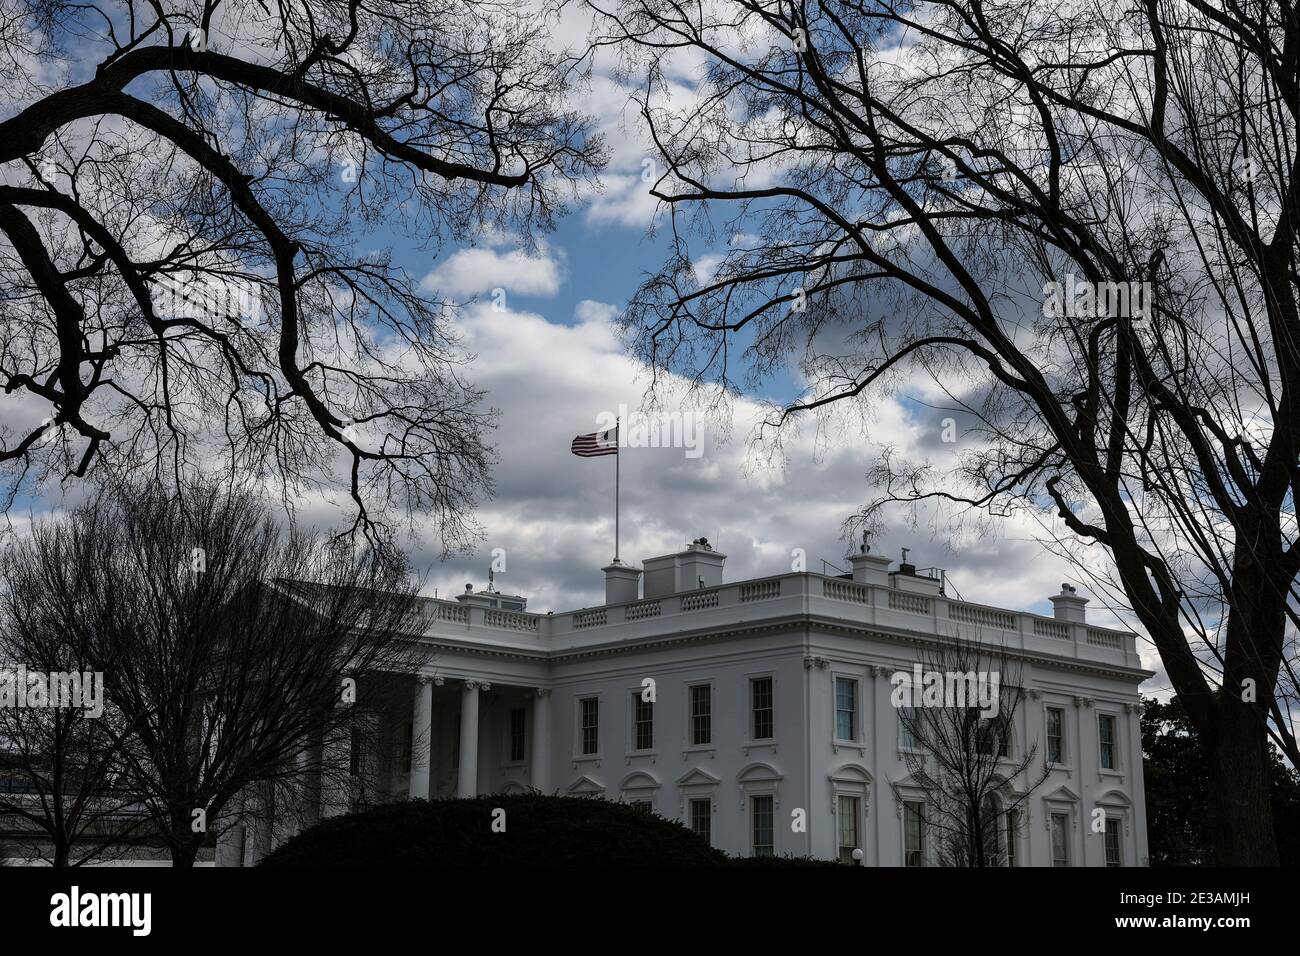 The North Lawn of the White House is seen on January 17, 2021 in Washington, DC., as the city prepares for the inauguration of the President elect Joe Biden.Credit: Oliver Contreras/Pool via CNP | usage worldwide Stock Photo